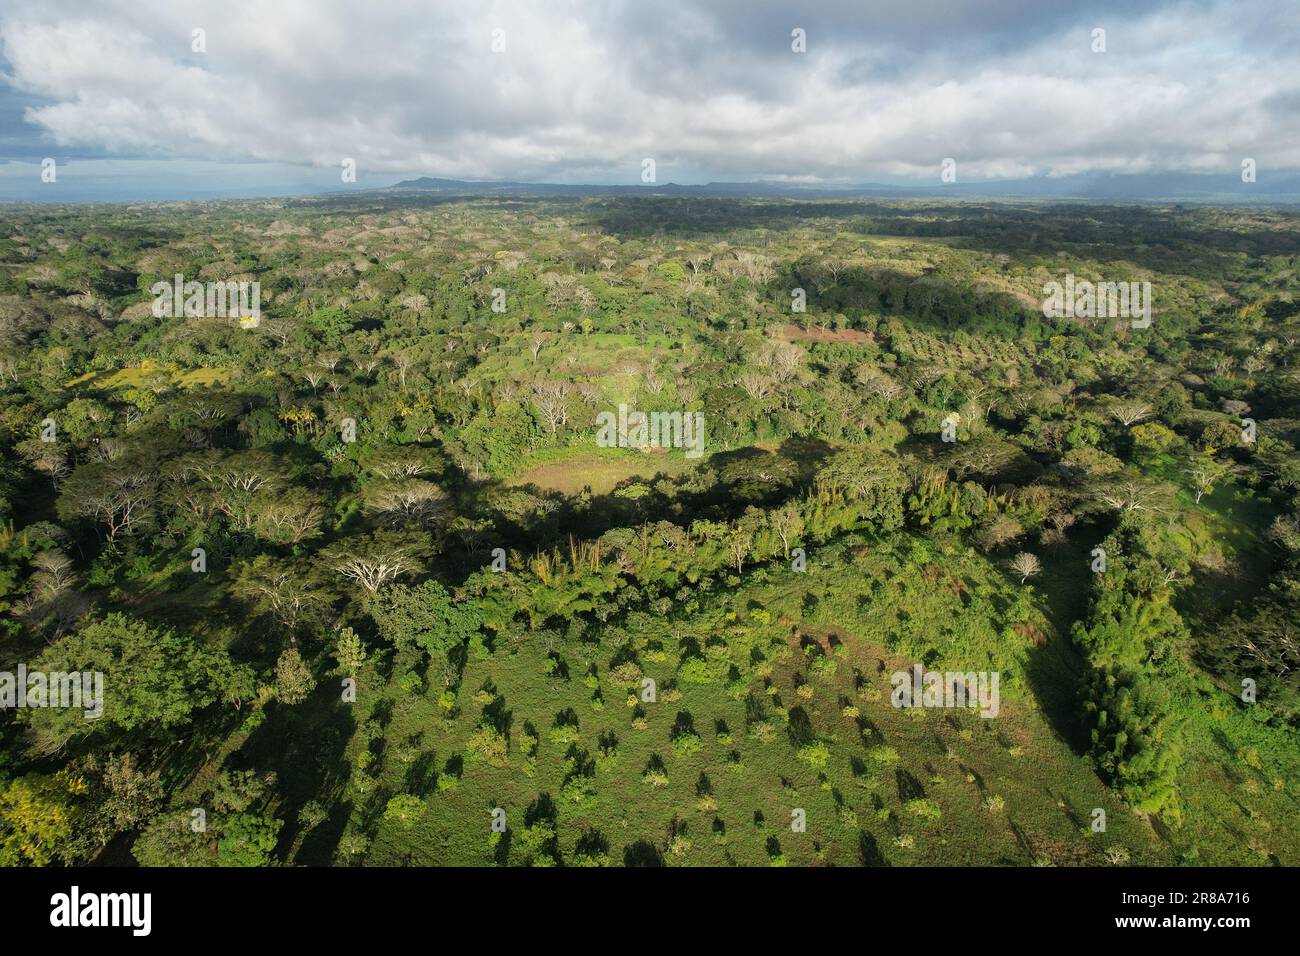 New plantation with small avocado trees on central America landscape Stock Photo